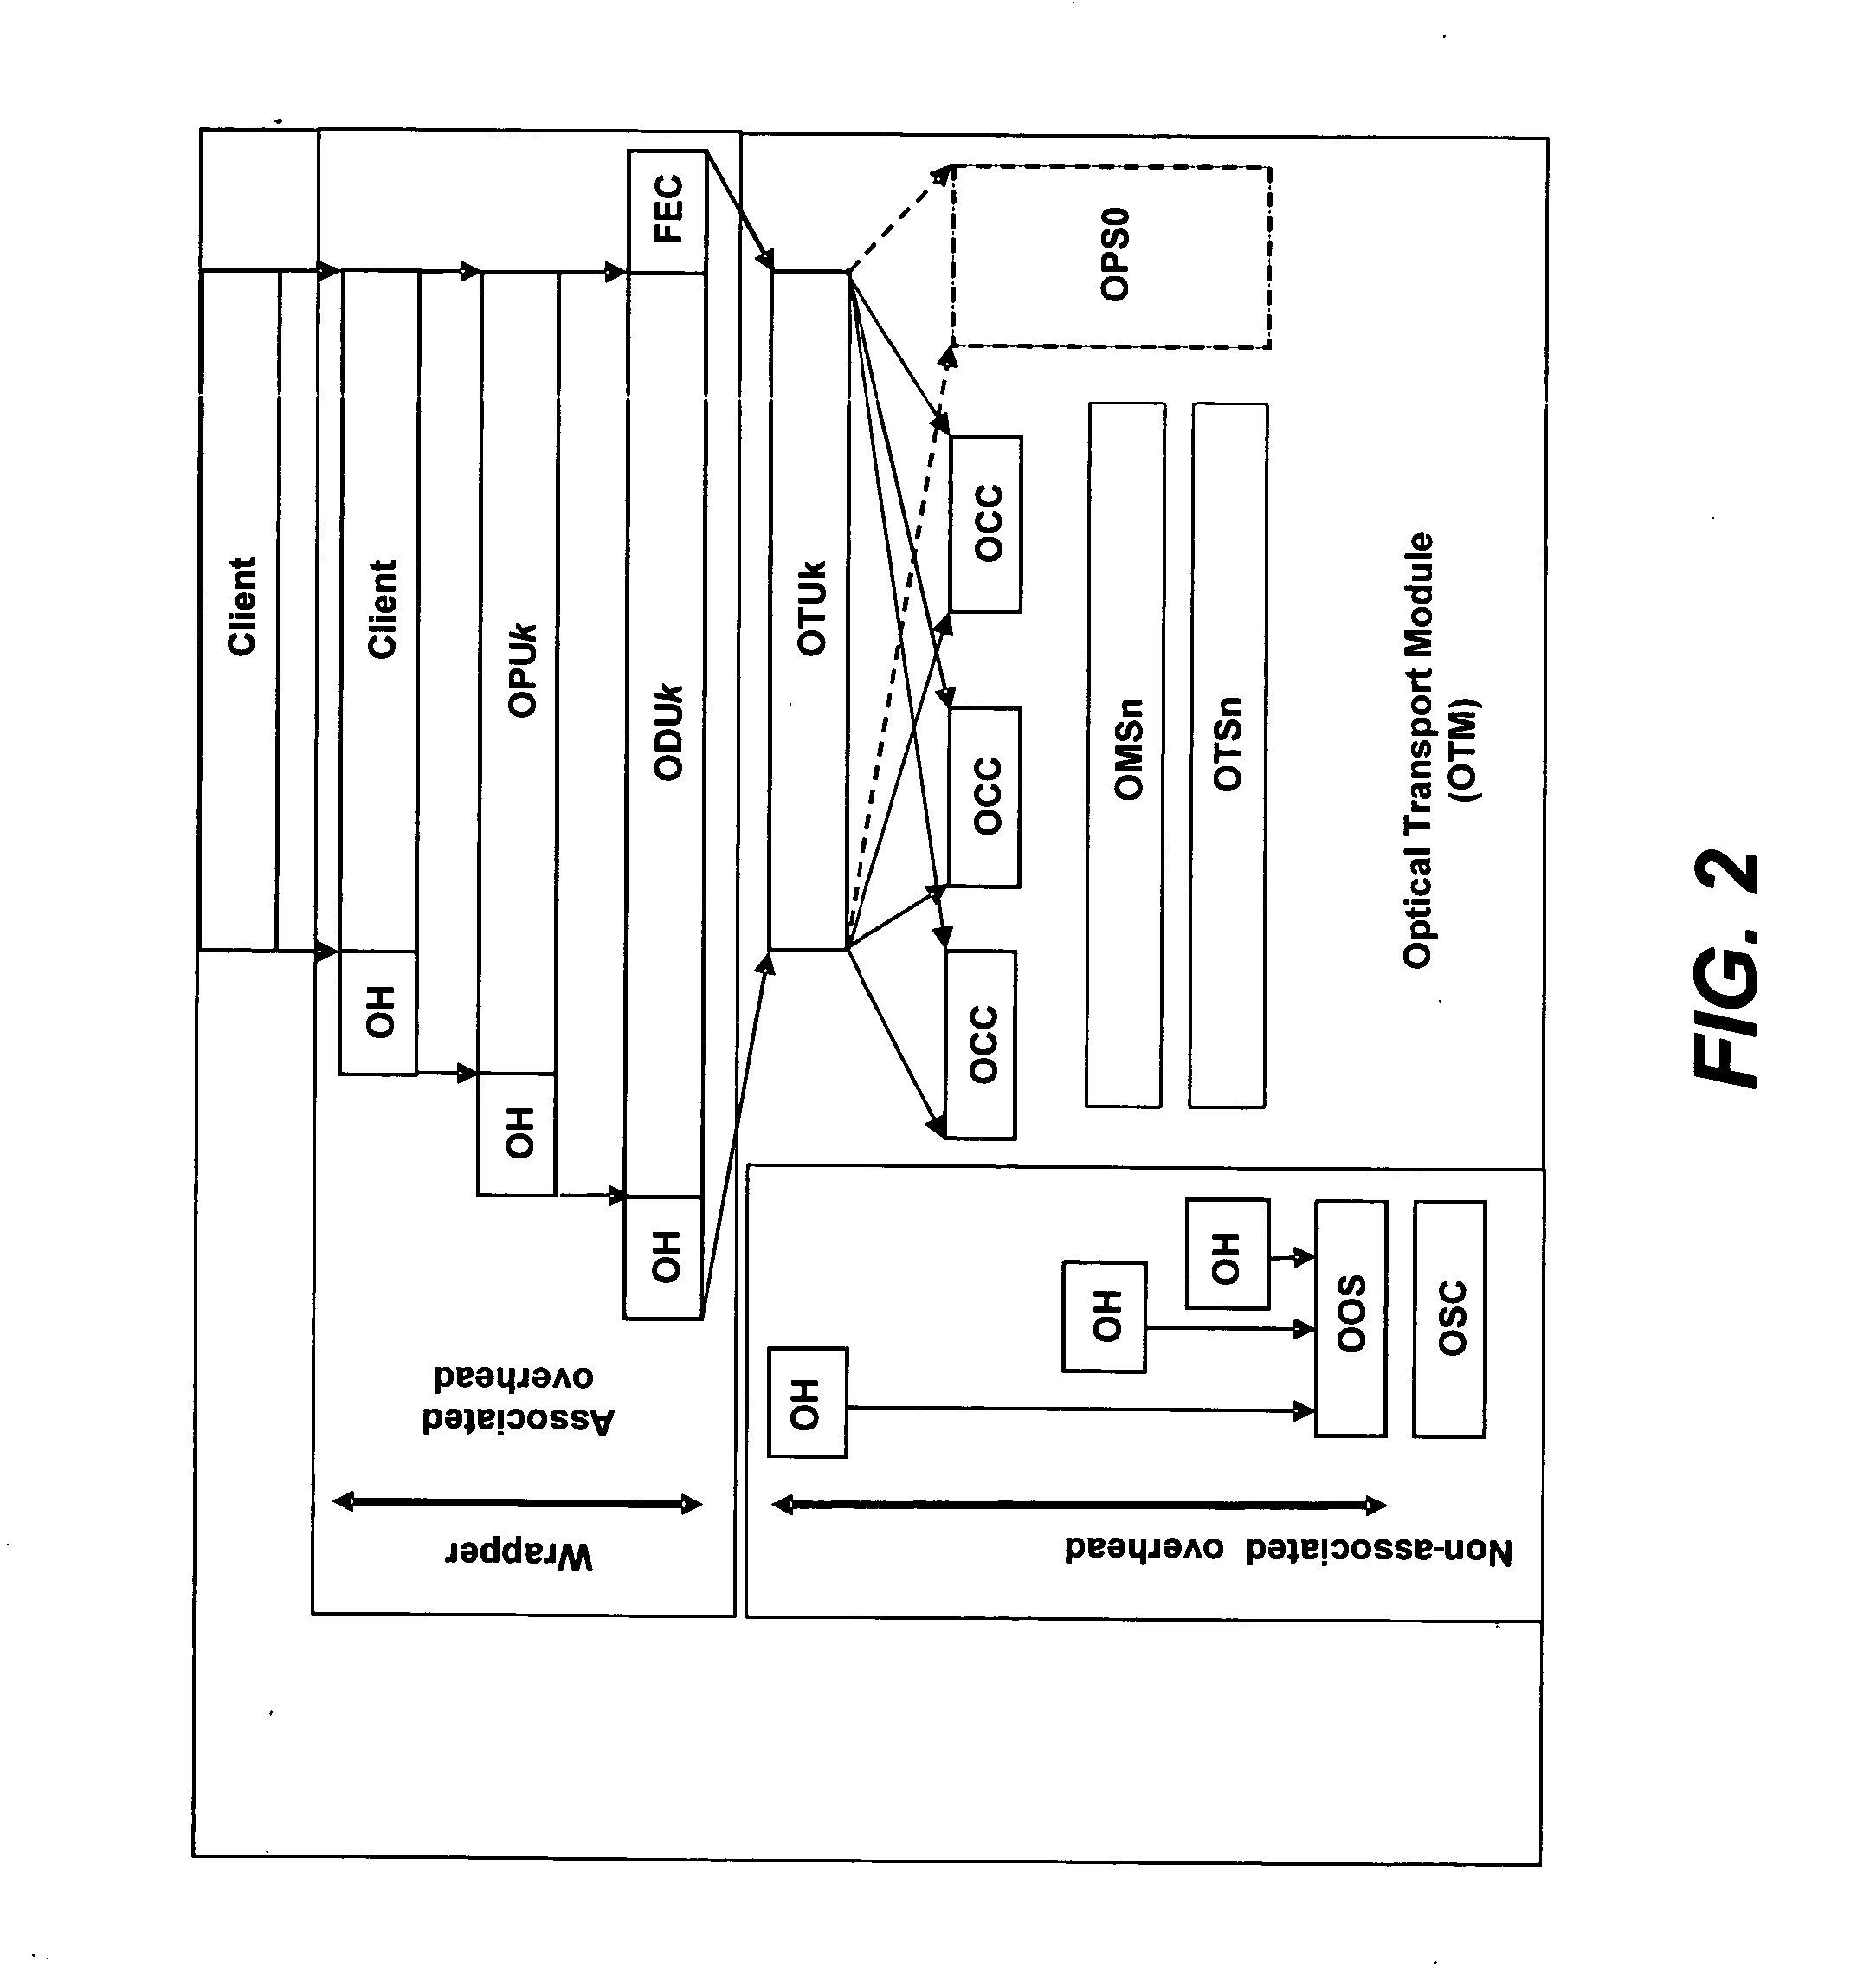 Optical transmission network with asynchronous mapping and demapping and digital wrapper frame for the same